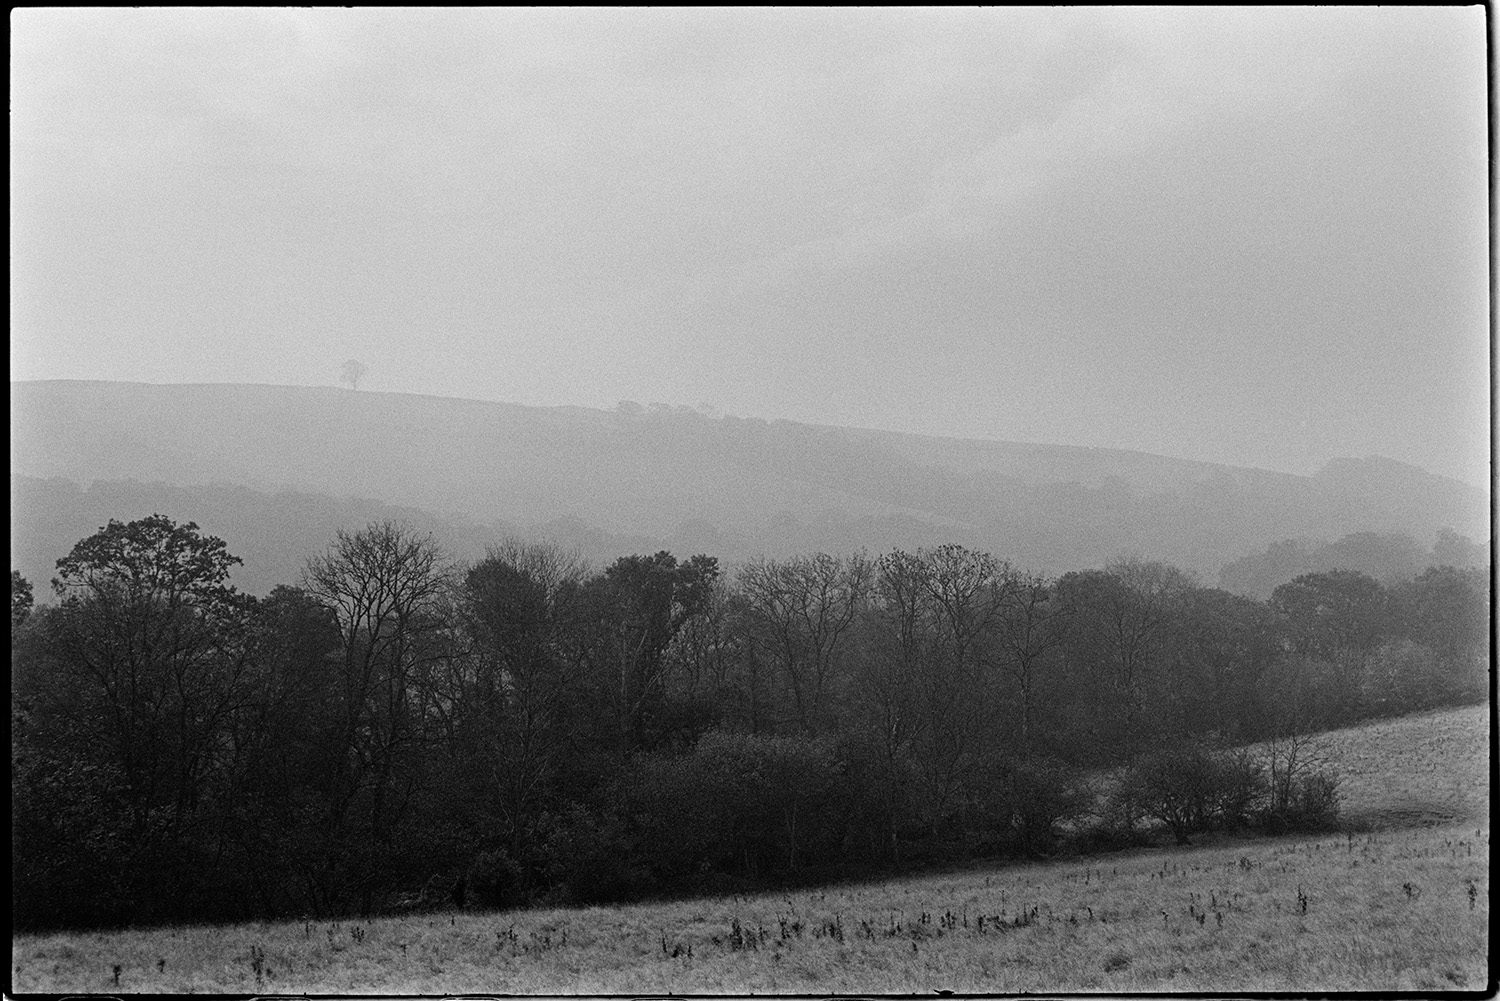 Misty, but very boring views details of old hedge. 
[A misty view of fields and trees near Chulmleigh.]